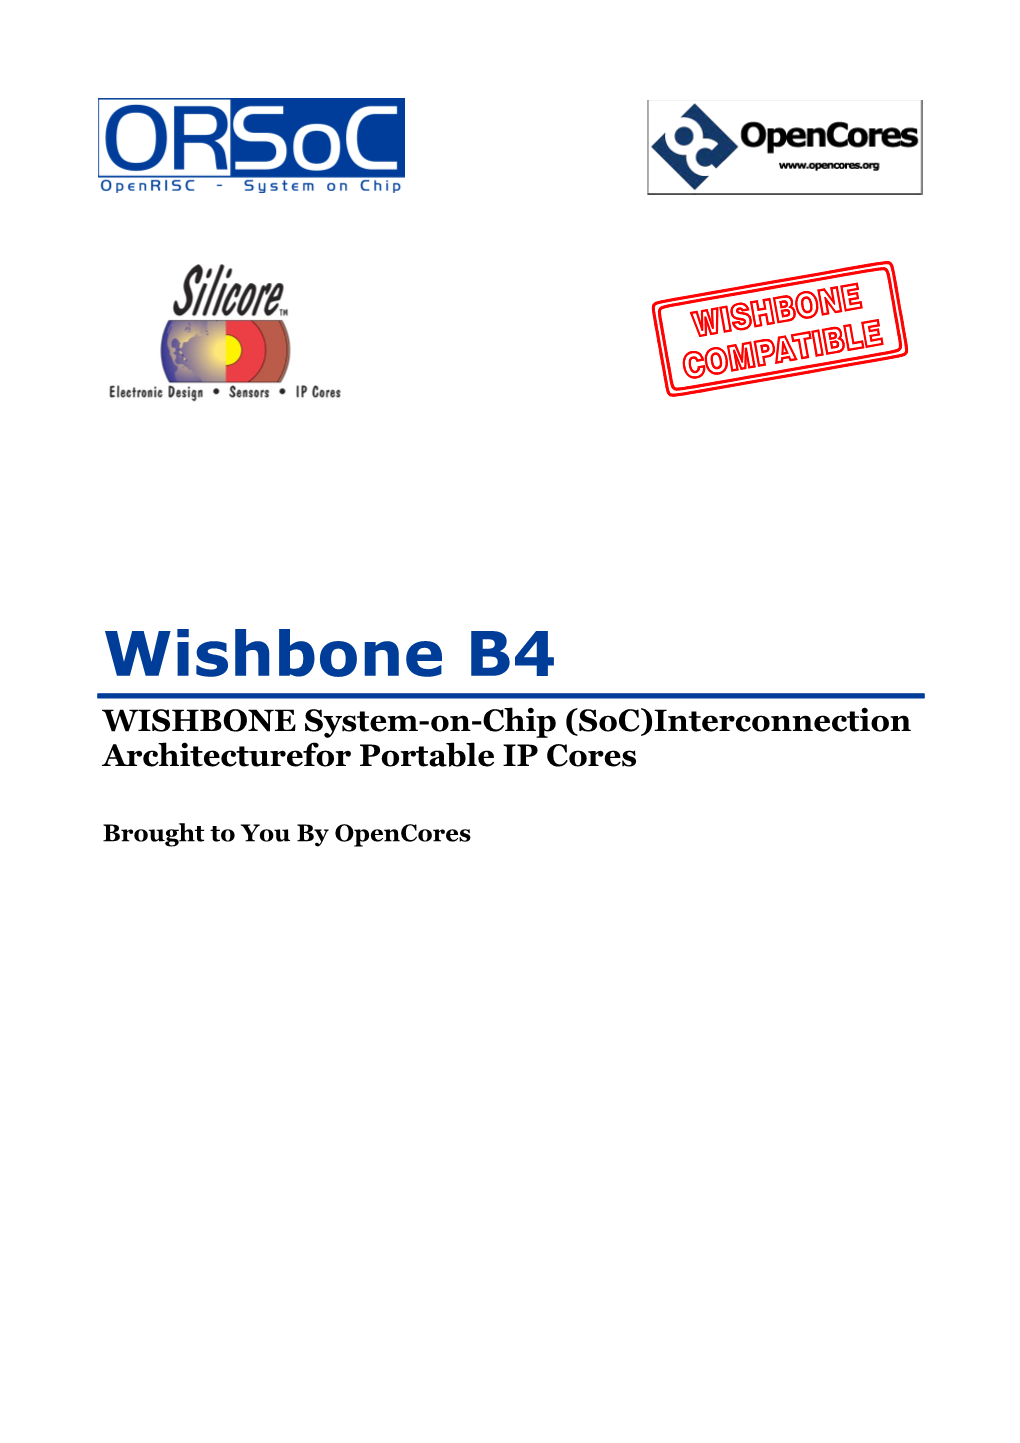 Wishbone B4 WISHBONE System-On-Chip (Soc)Interconnection Architecturefor Portable IP Cores